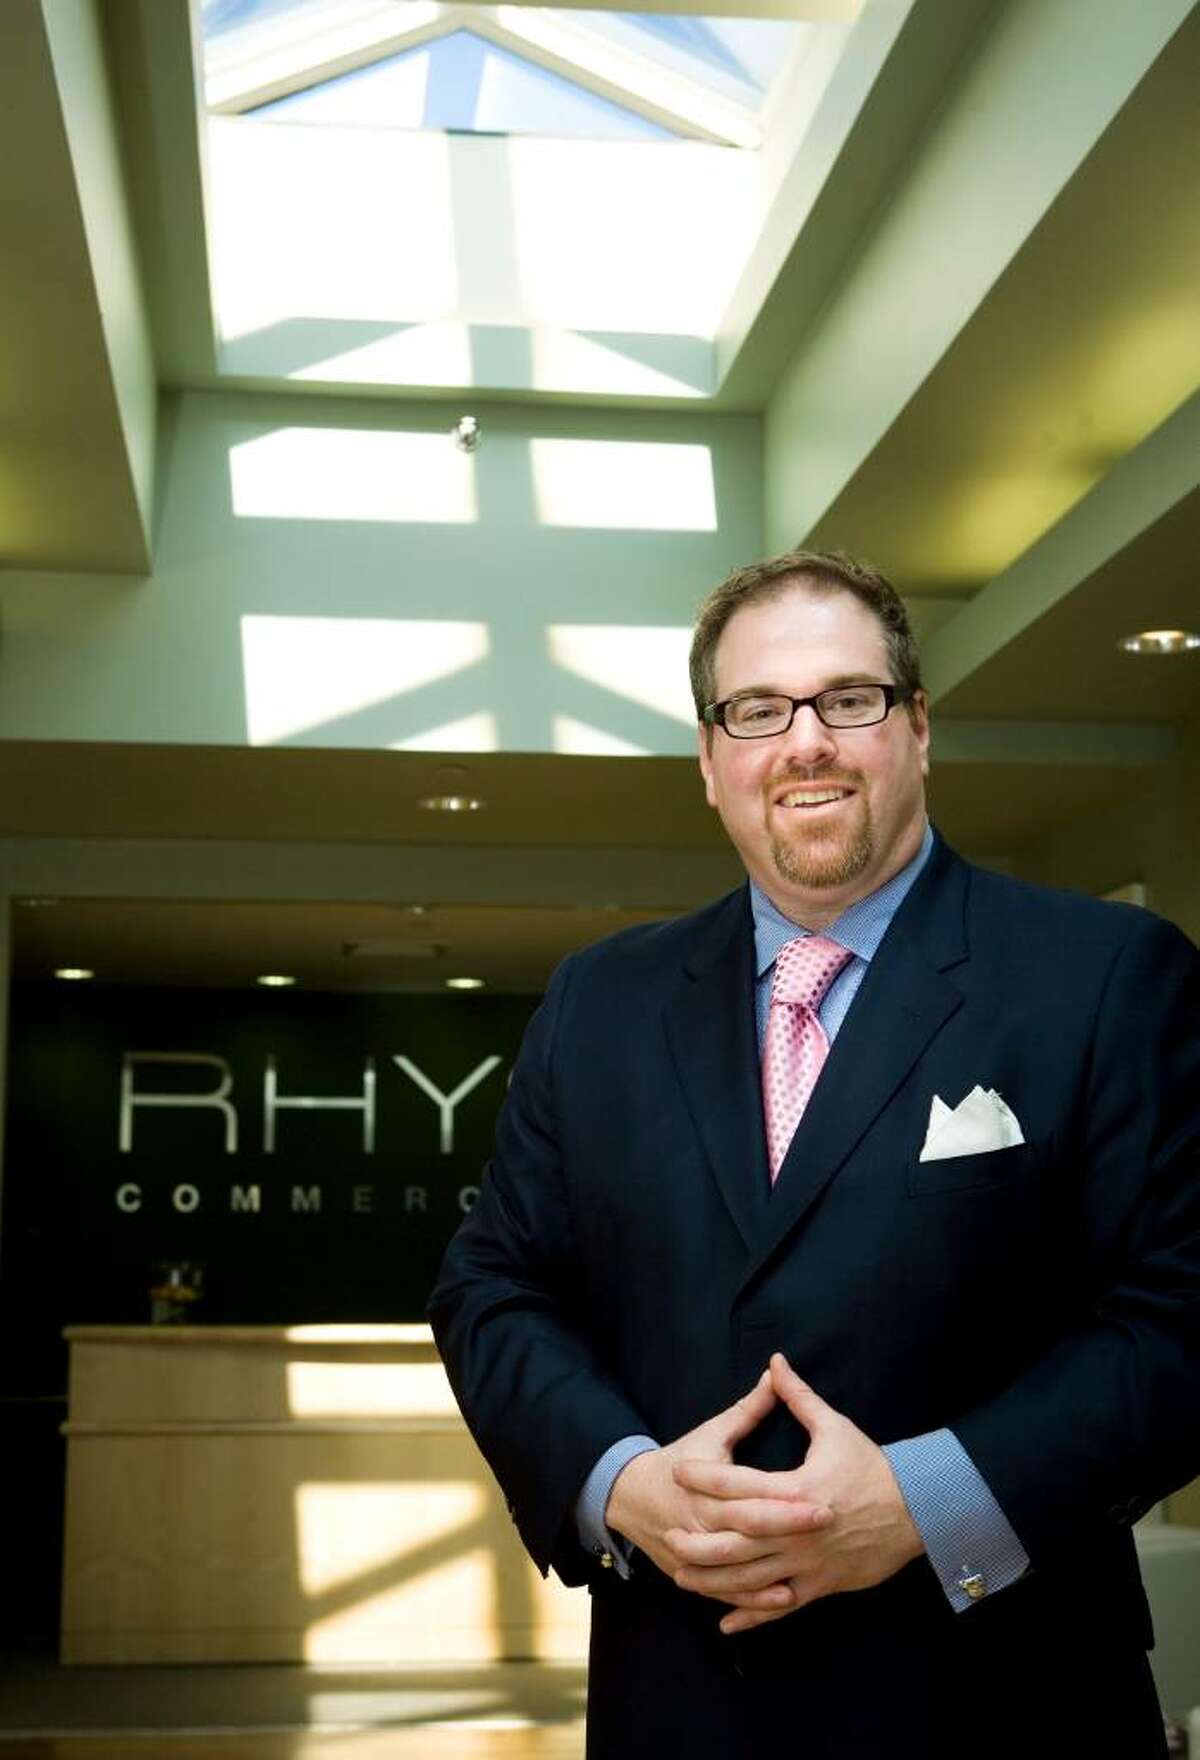 Cory Gubner recently started RHYS, his own commercial real estate firm. He is photographed at their office on West Park Place in Stamford.